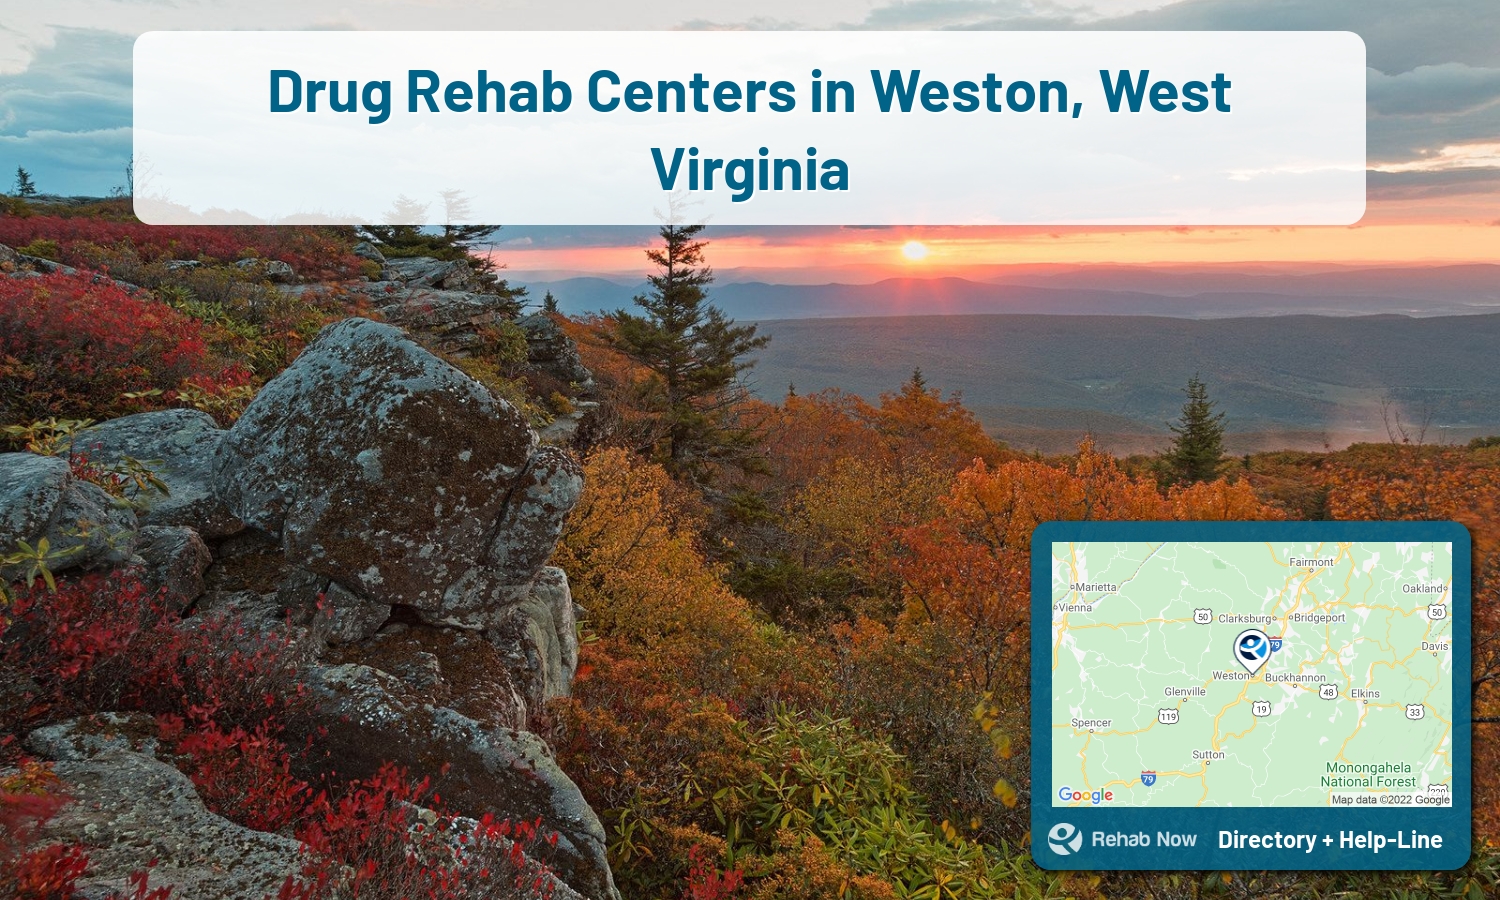 Let our expert counselors help find the best addiction treatment in Weston, West Virginia now with a free call to our hotline.